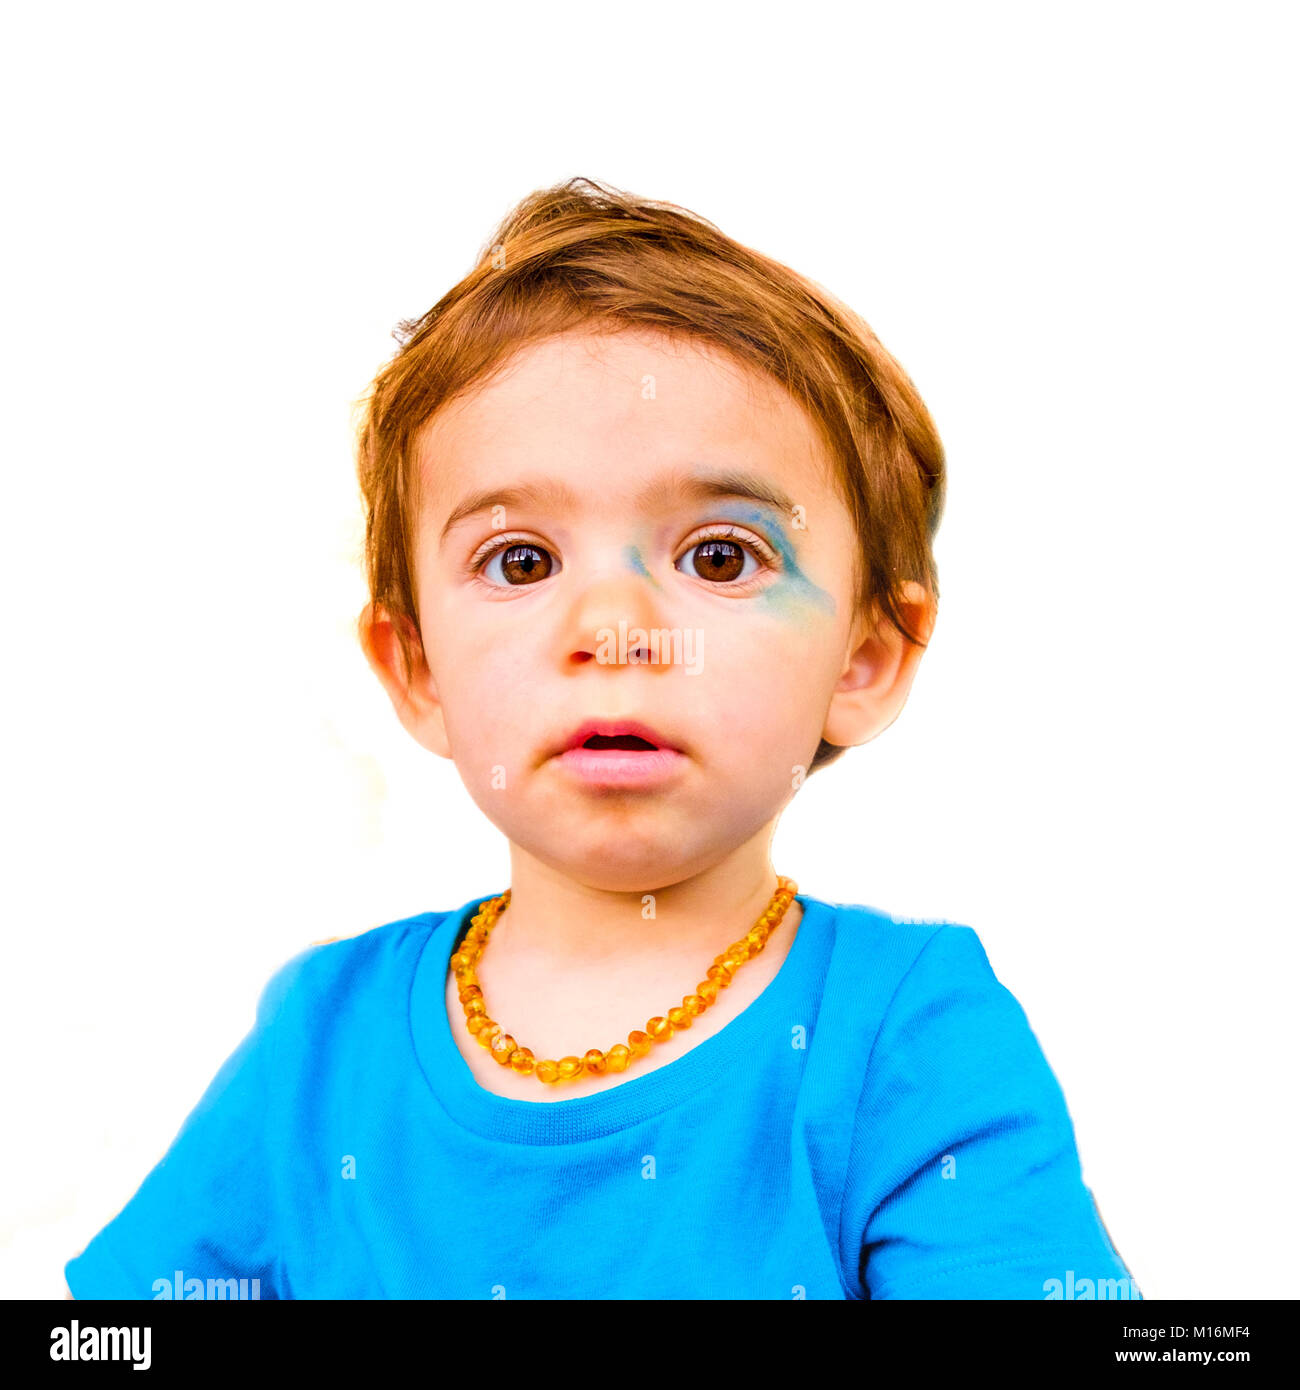 innocent baby face isolated painted blue face expression newborn Stock Photo